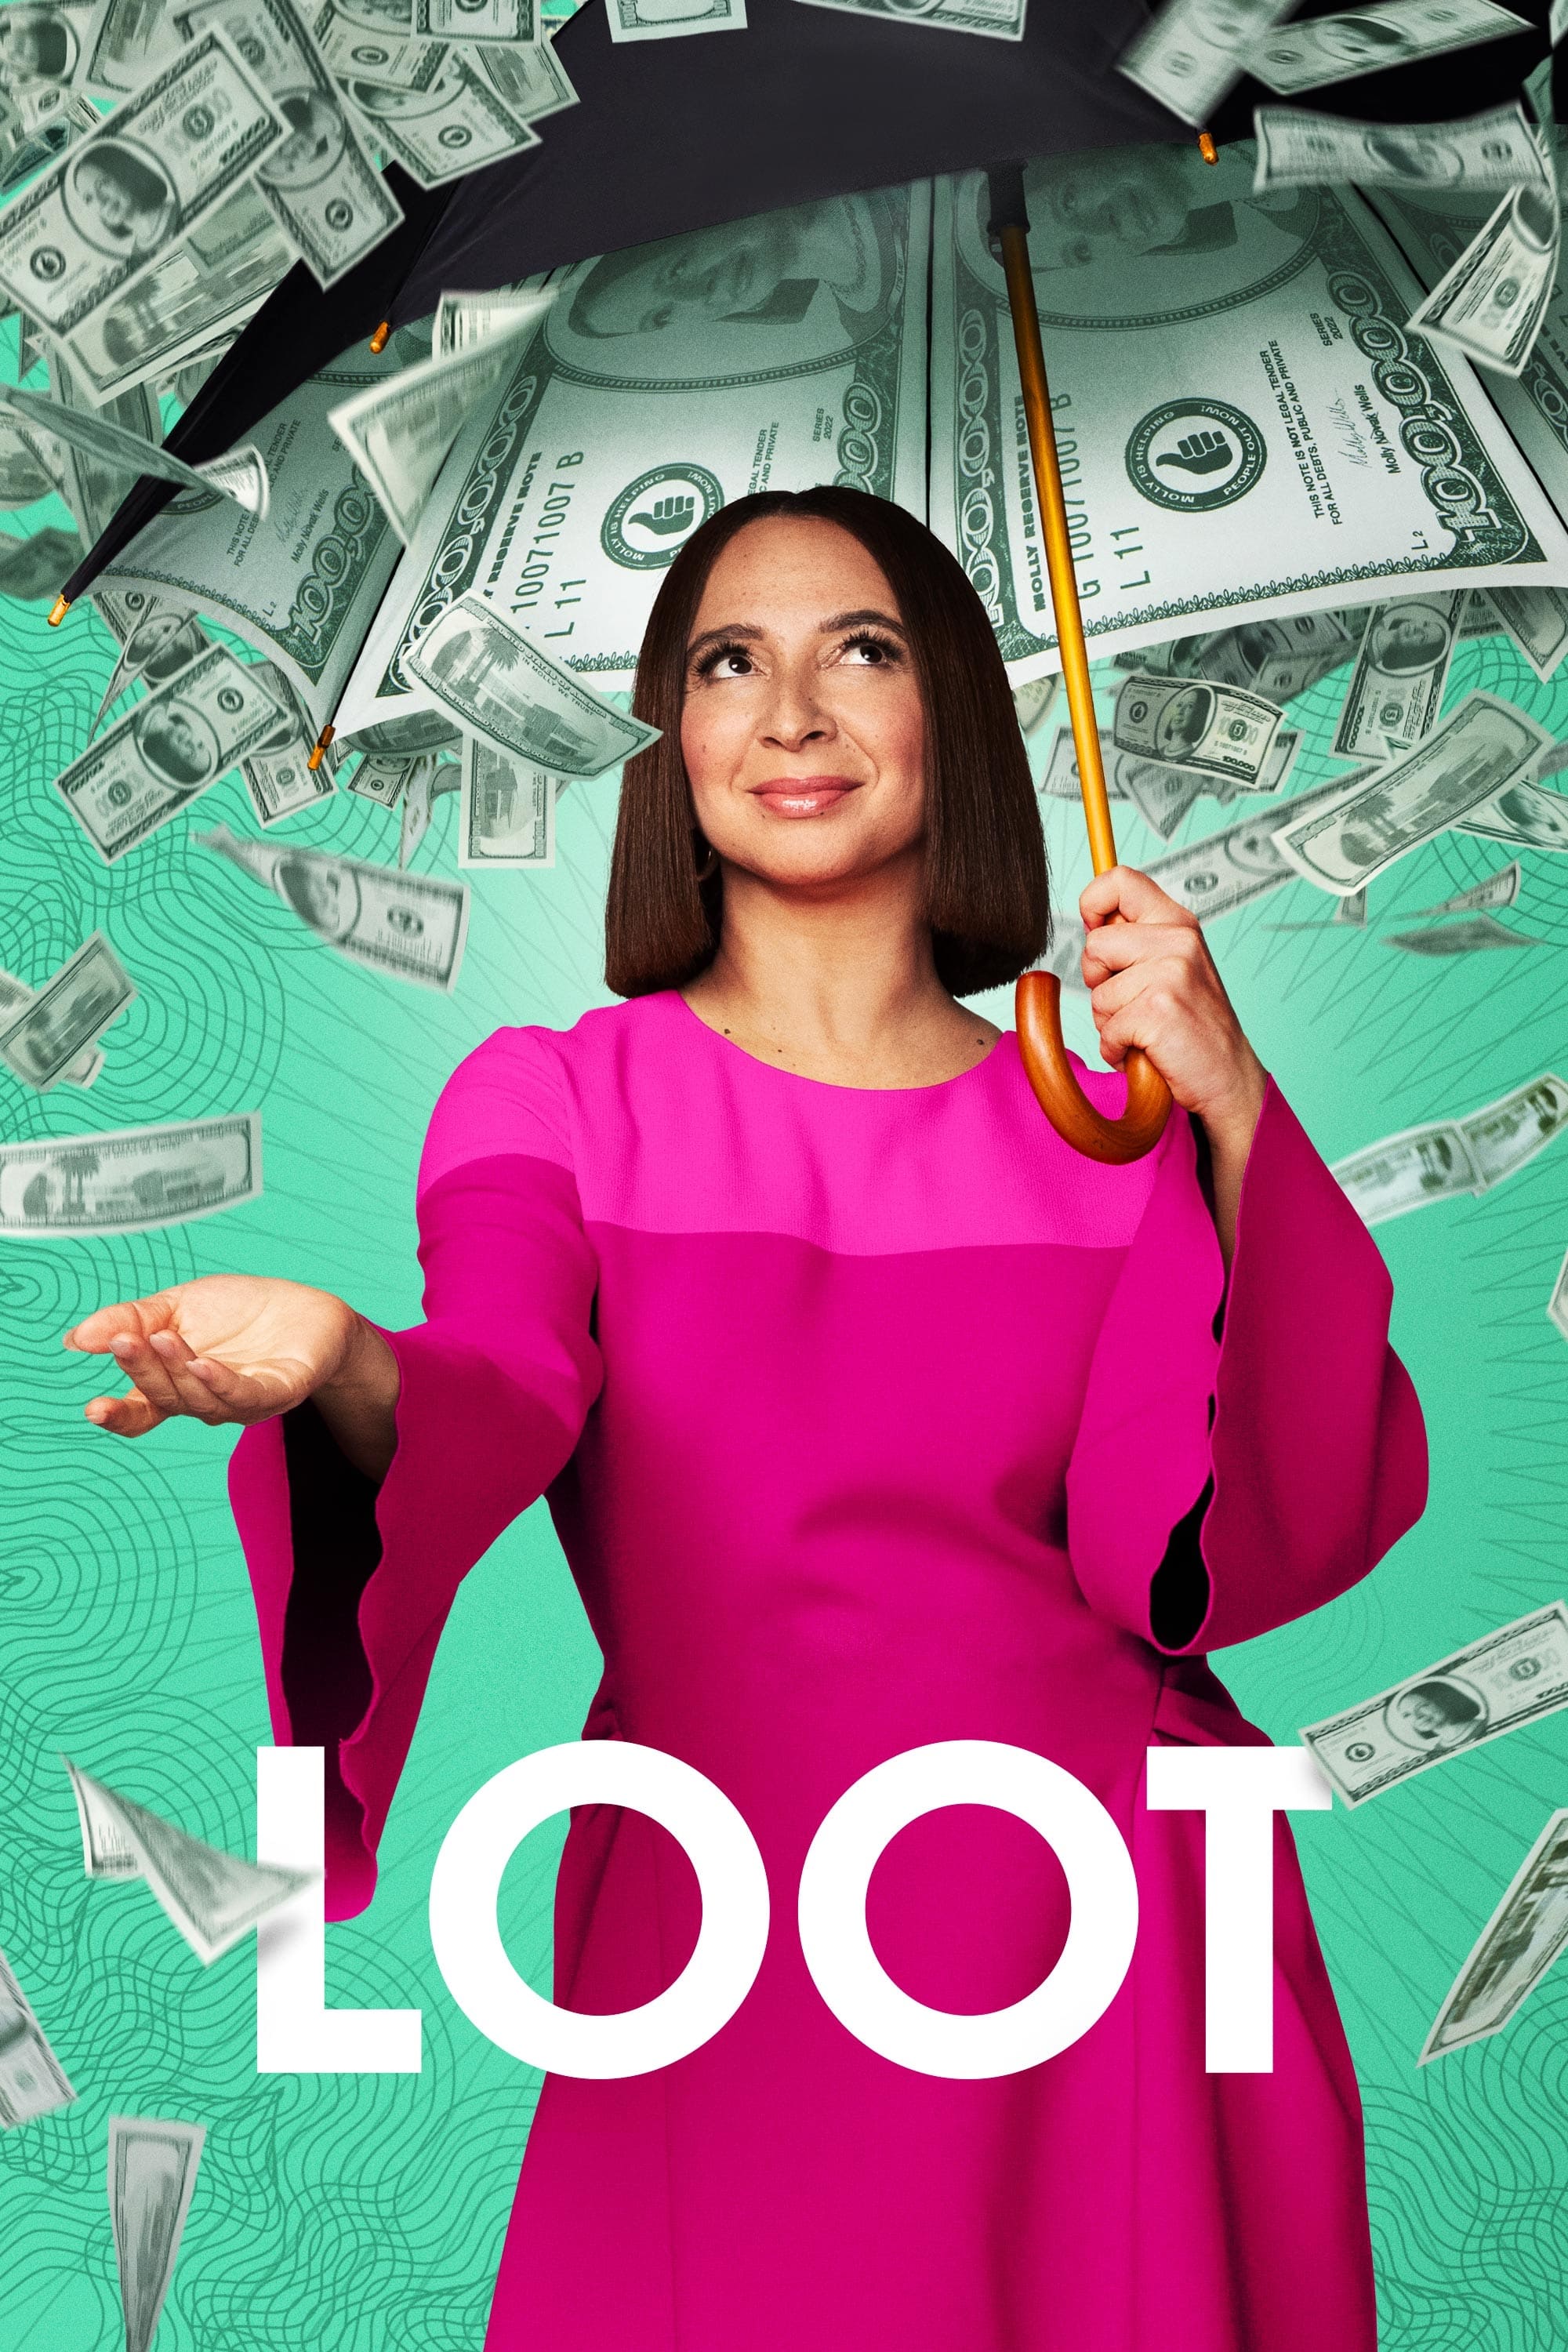 Loot TV Shows About Divorce